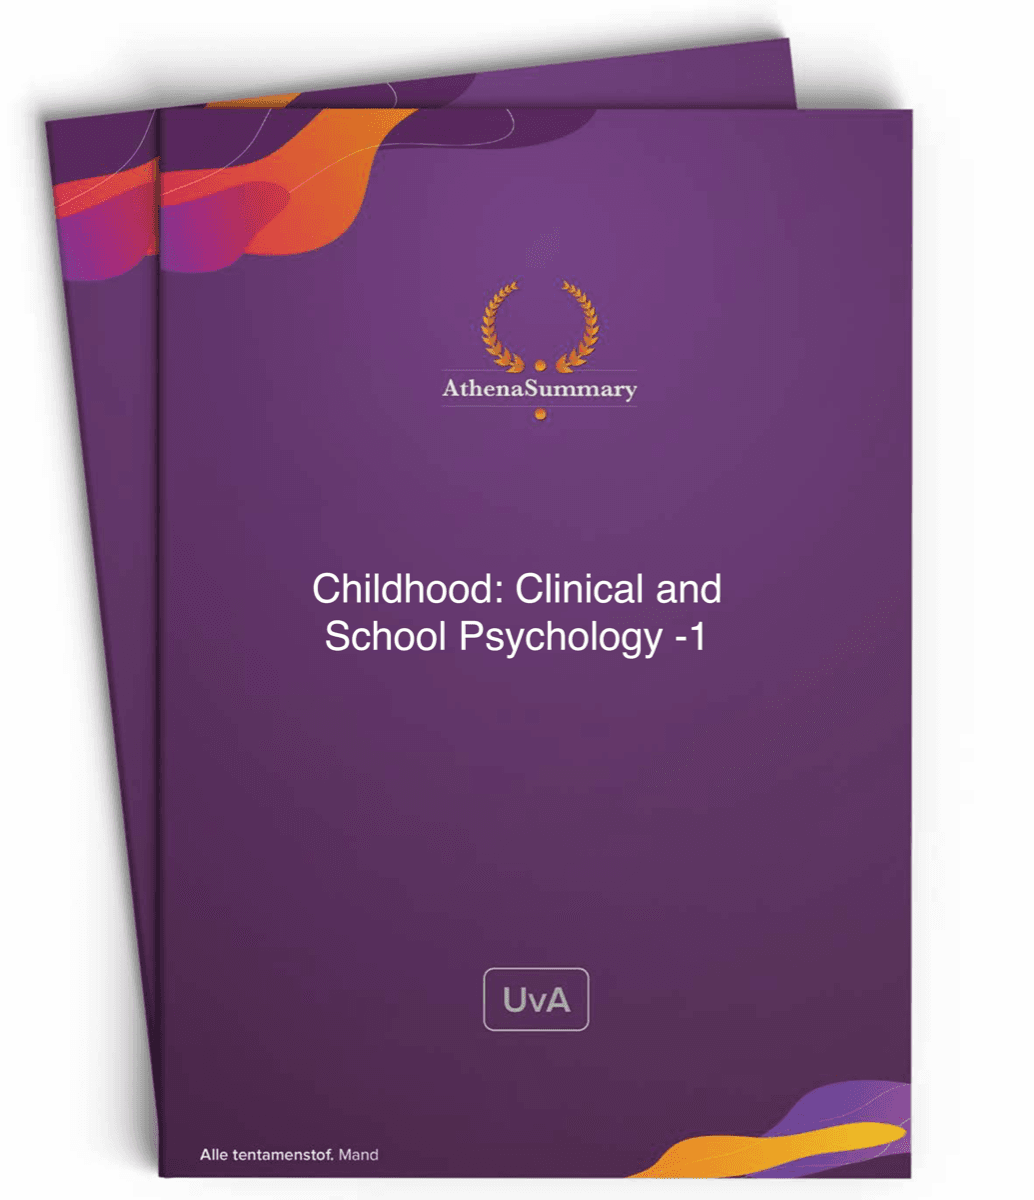 Literature Summary: Childhood: Clinical and School Psychology -1